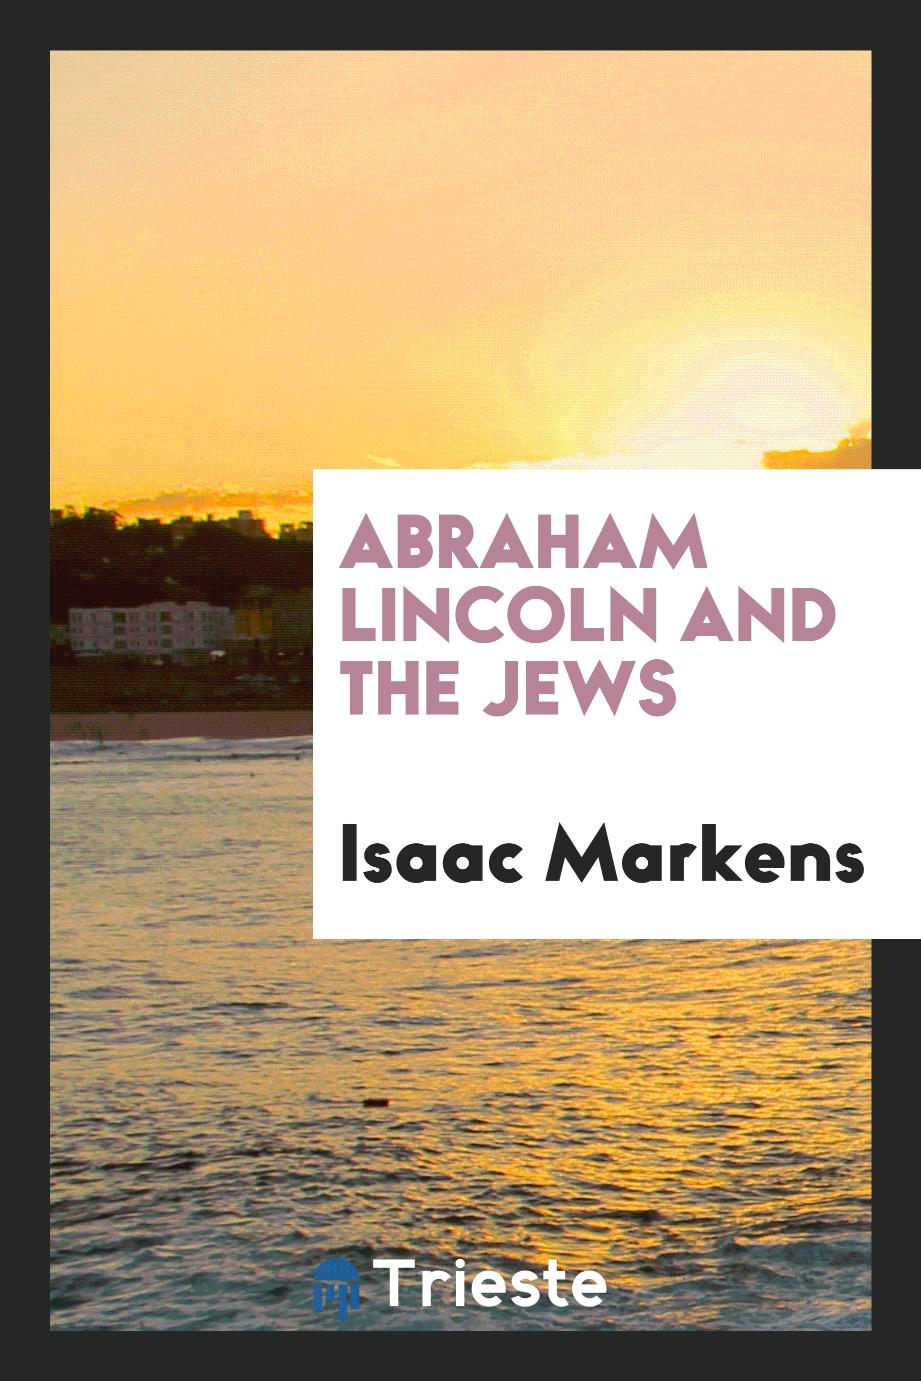 Abraham Lincoln and the Jews